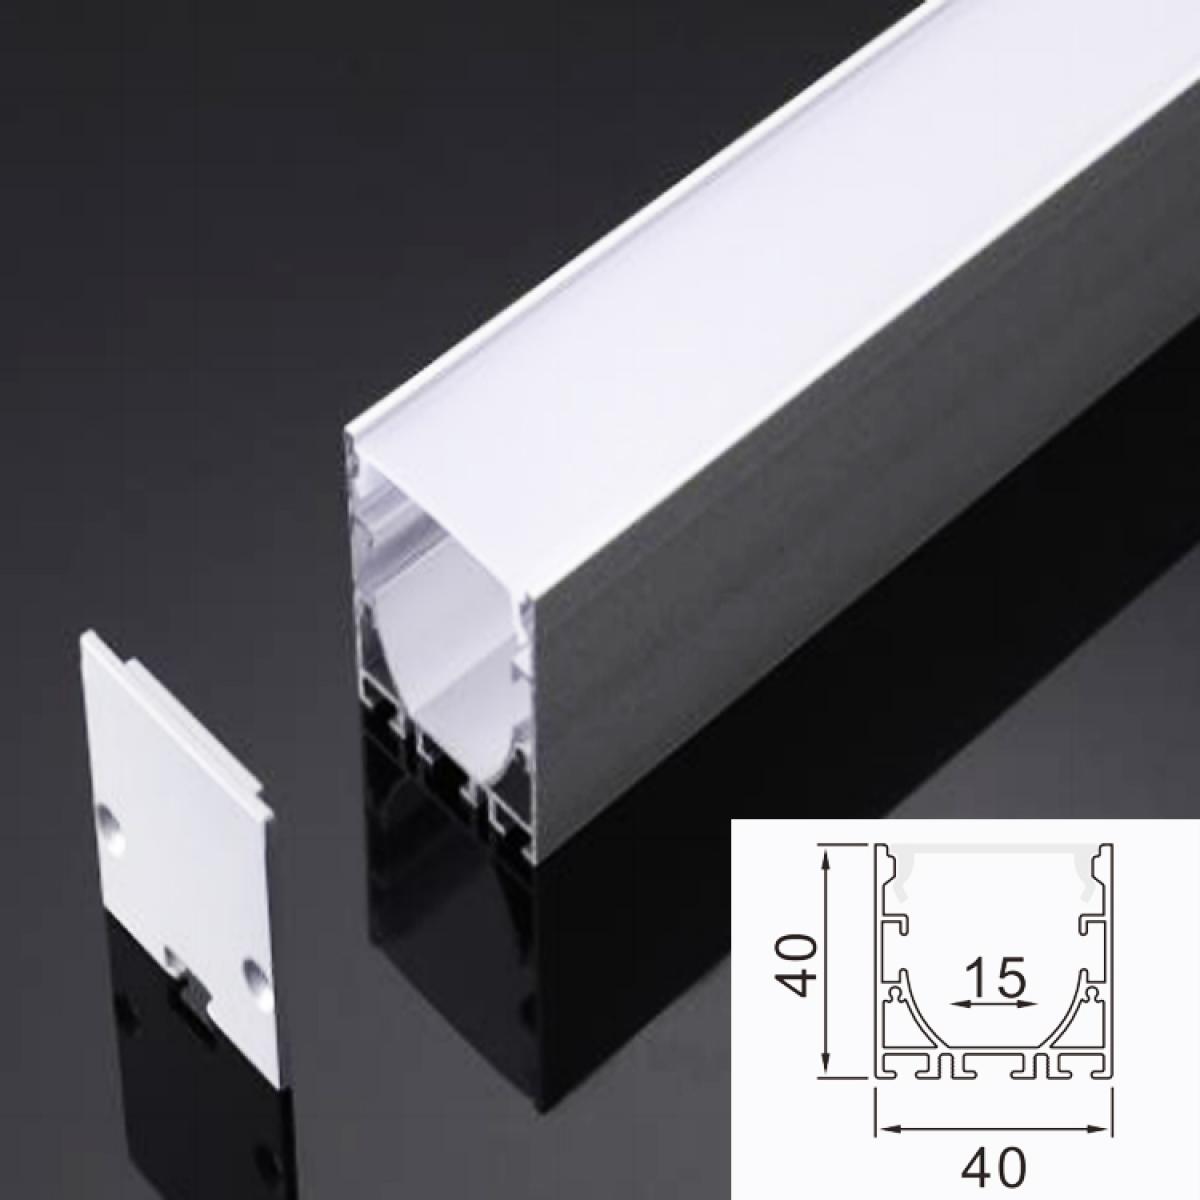 TXN-M40 New Led Linear Light Cover Aluminum Extrusion Profiles And Plastic Diffuser For Office, LED Aluminum Profile With PC Cover End Caps And Mounting Clips For LED Strip 